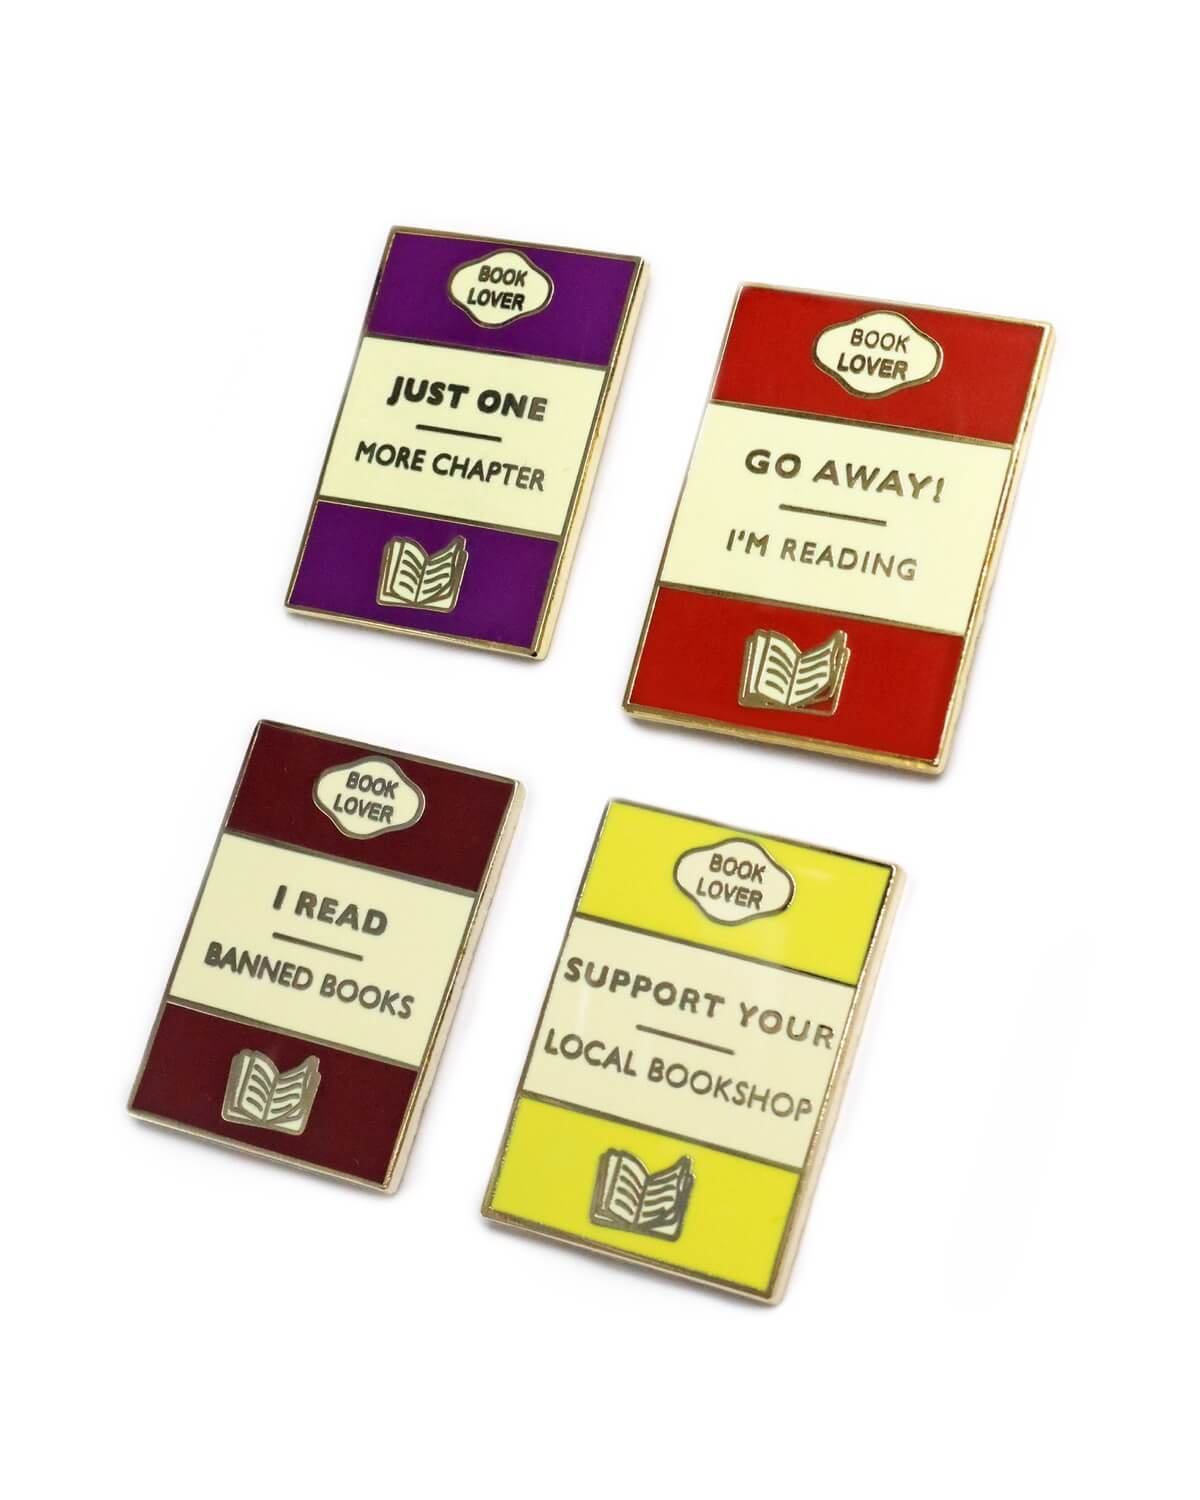 A set of 4 pin badges featuring a classic book design